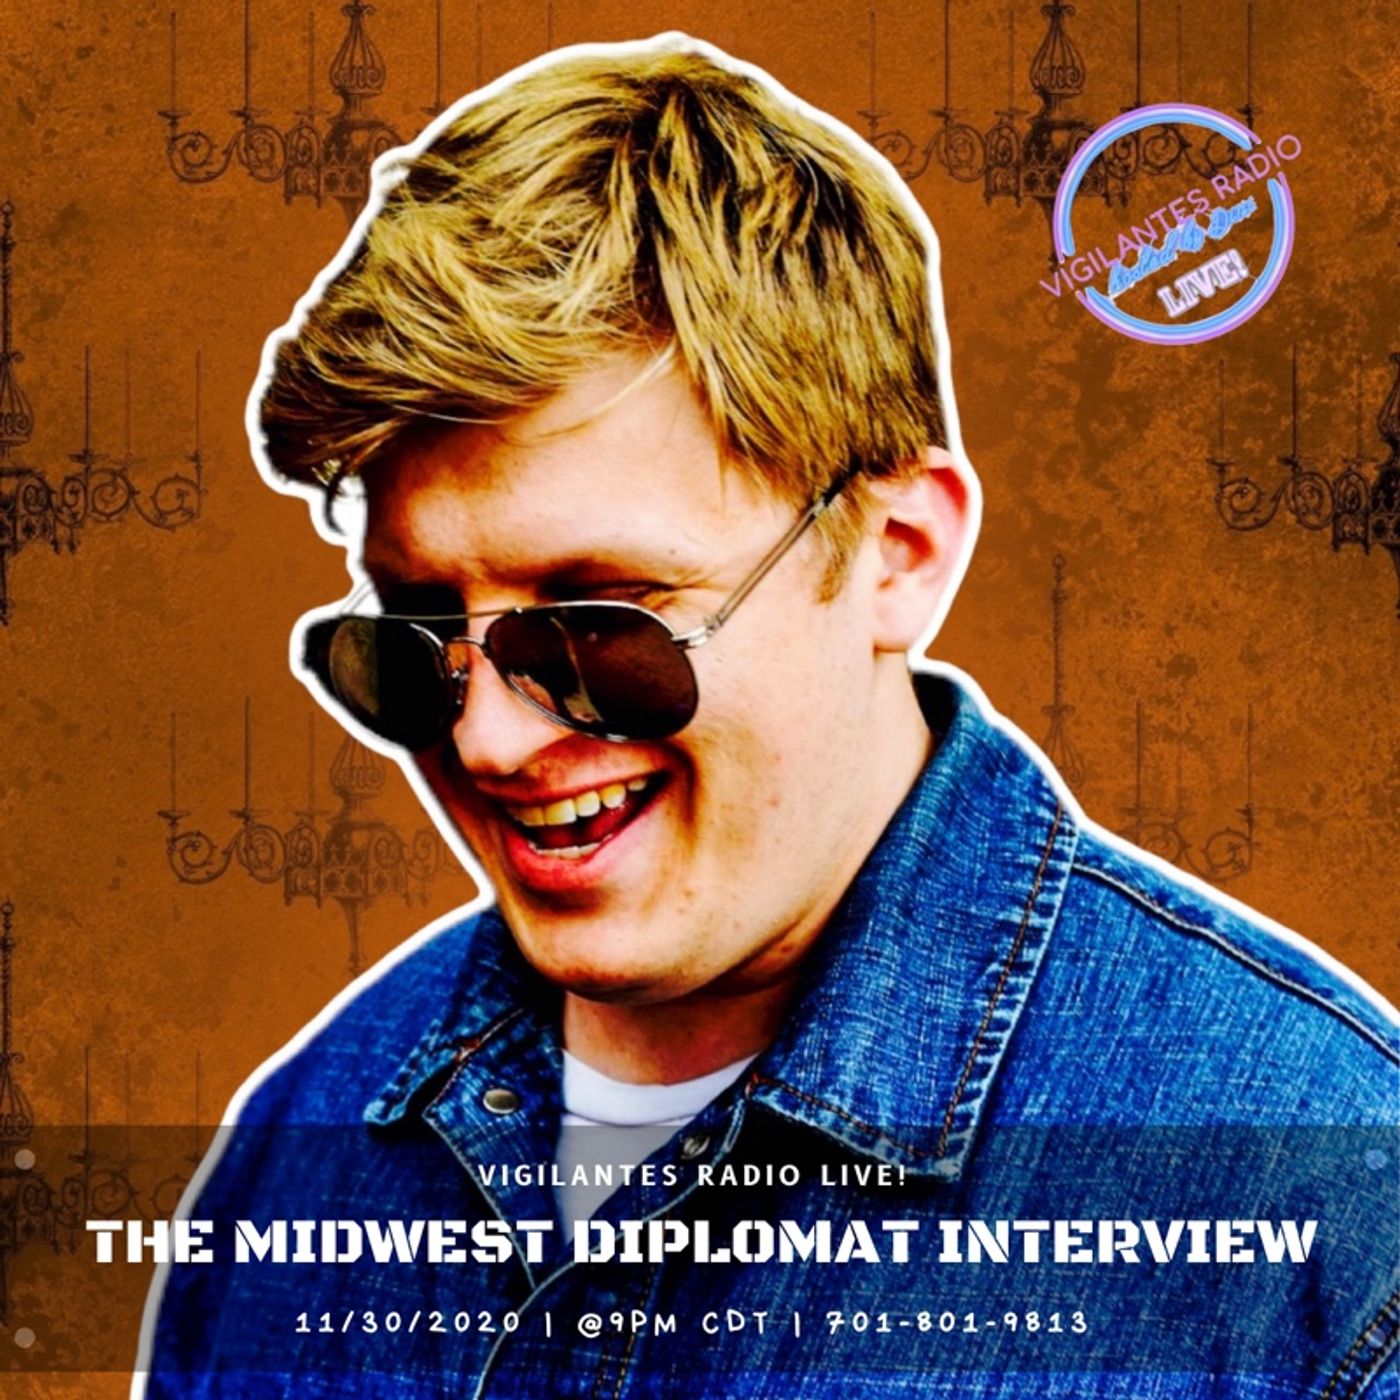 The Midwest Diplomat Interview. Image